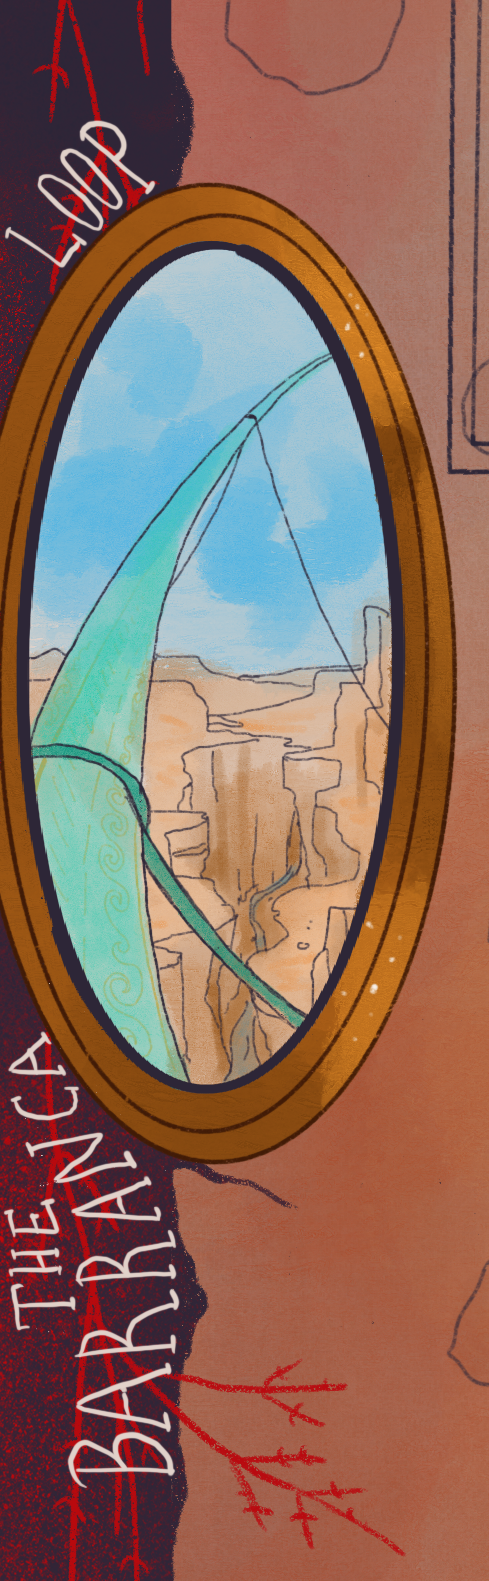 A drawing of a curving teal cable ascending from desert canyons below.